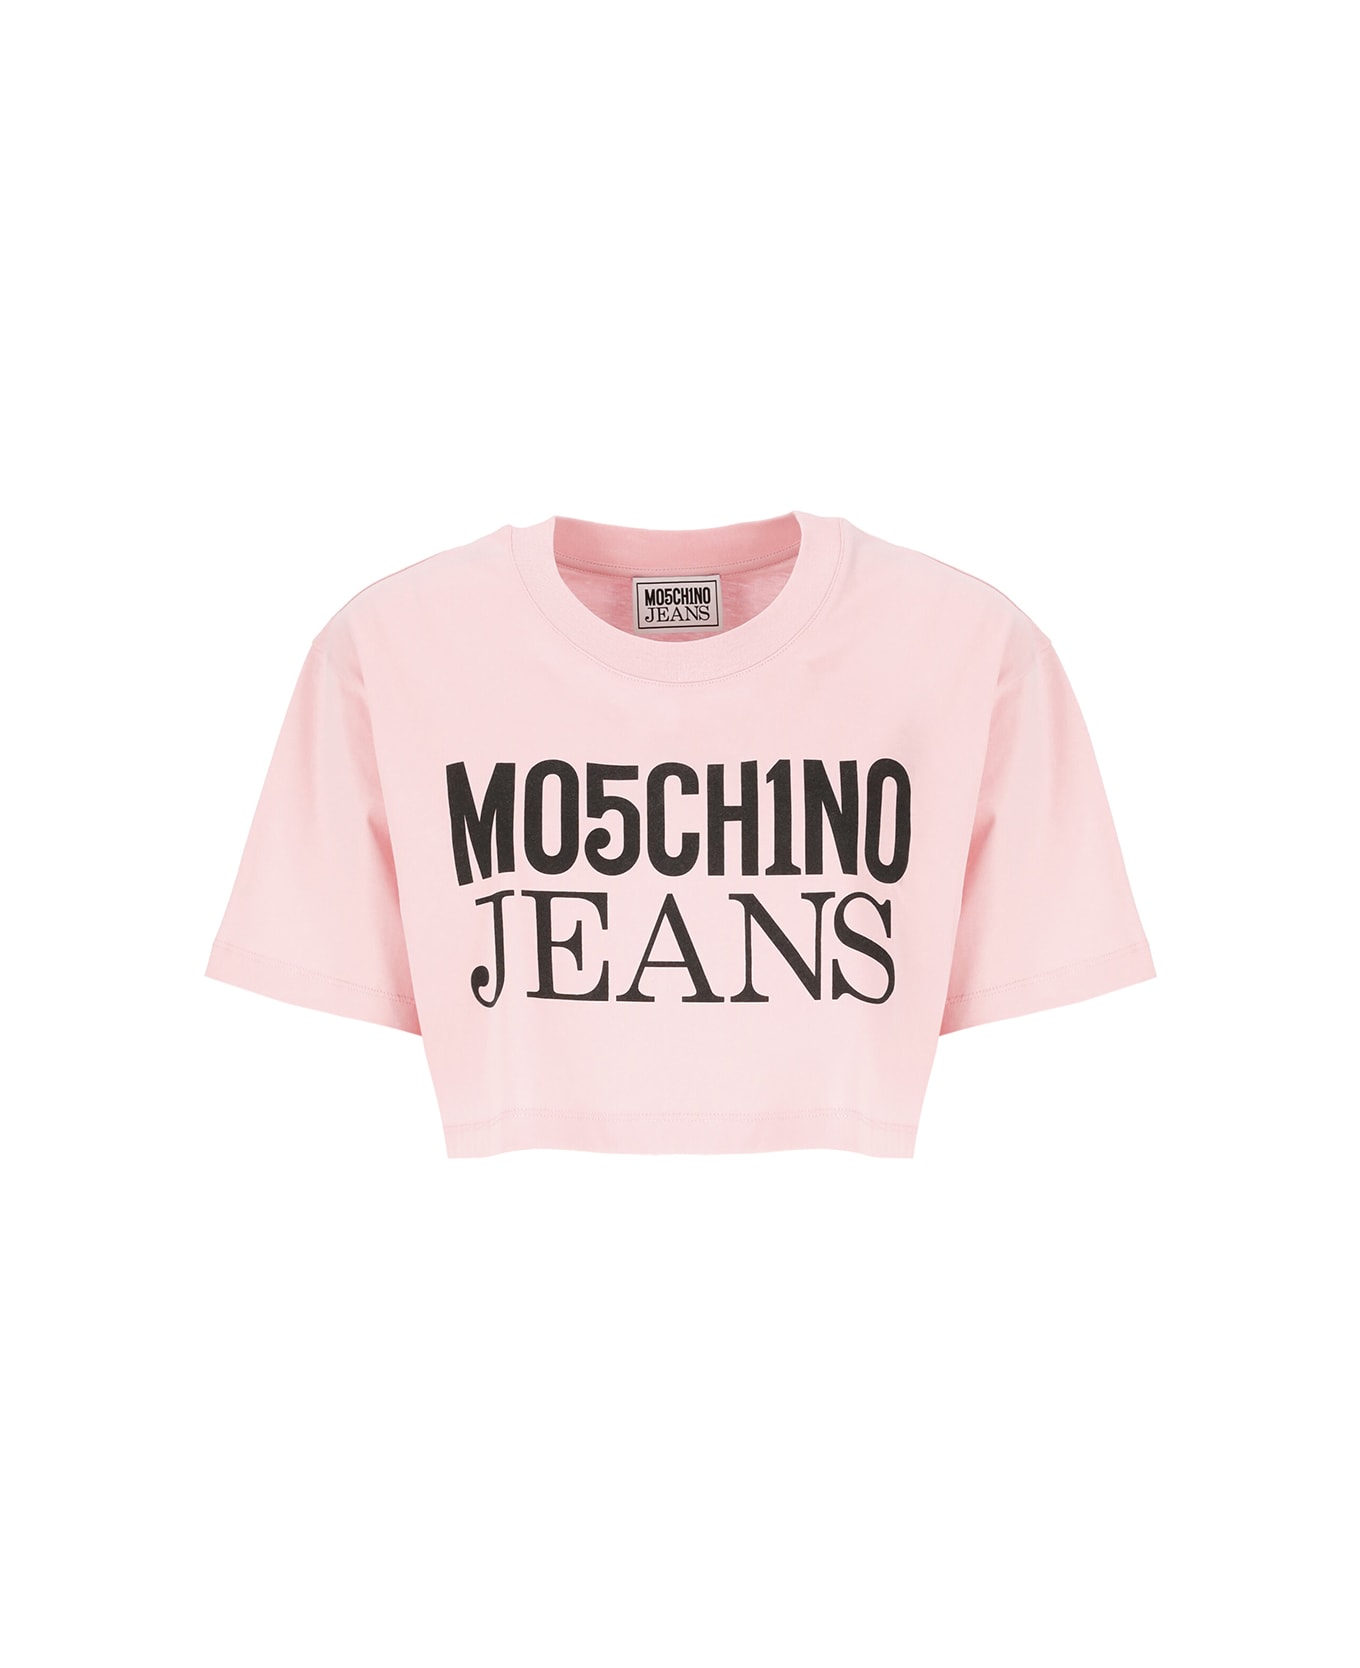 M05CH1N0 Jeans T-shirt With Logo - Pink Tシャツ